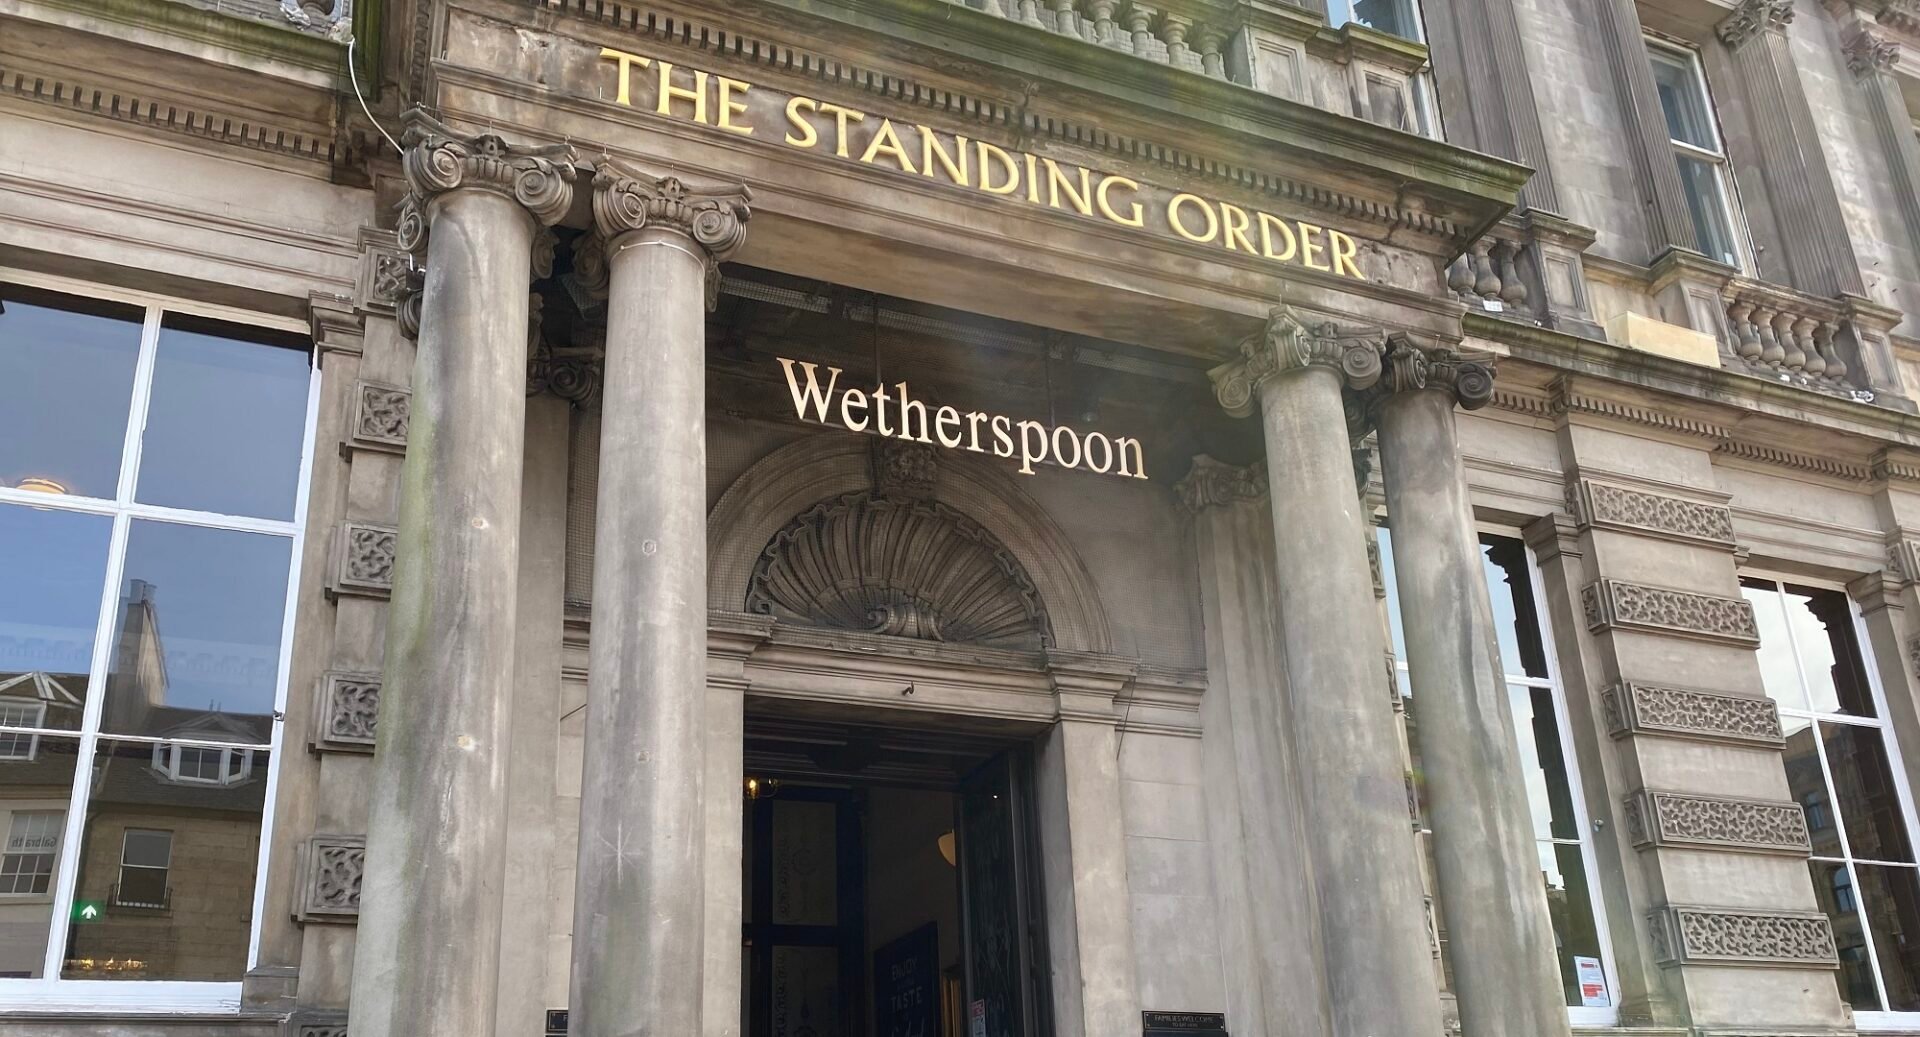 The Standing Order